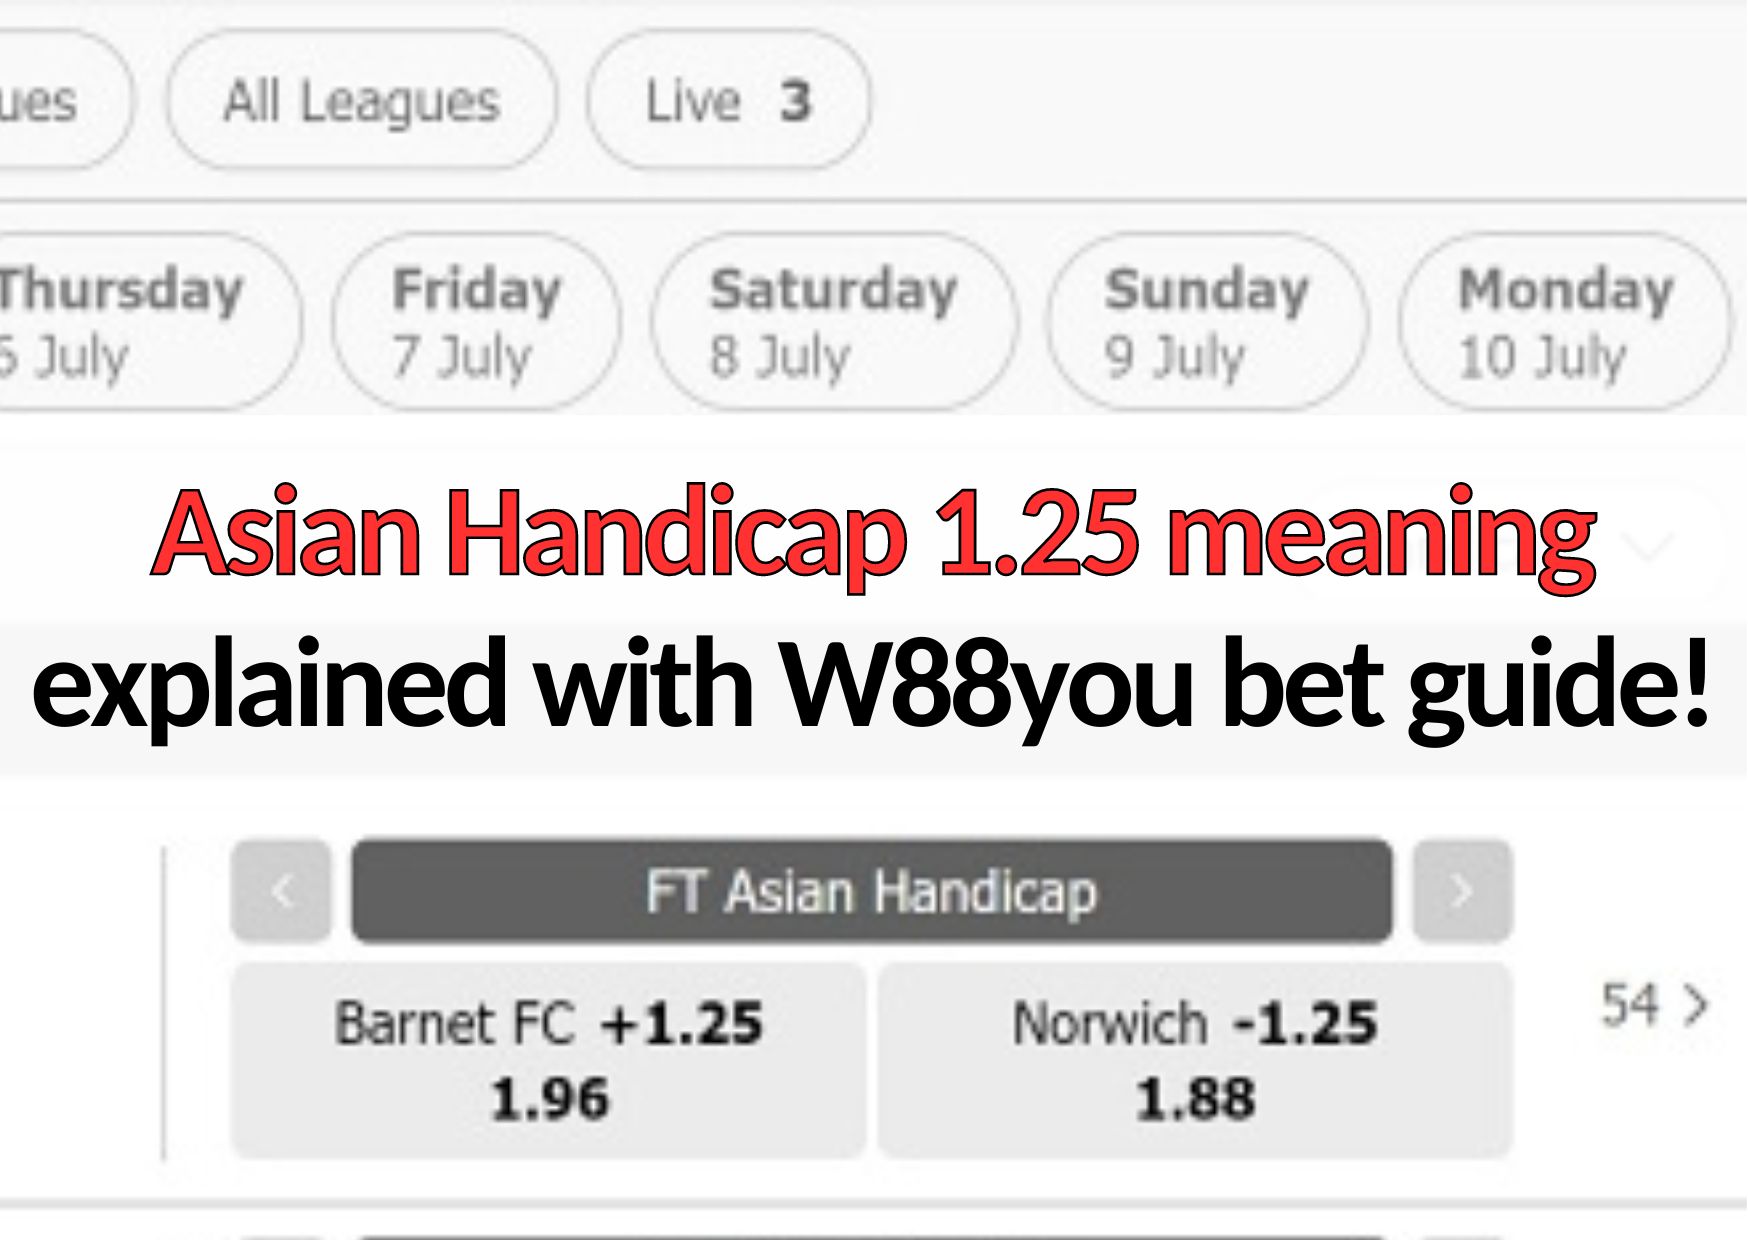 Asian Handicap 1.25 meaning explained by w88you